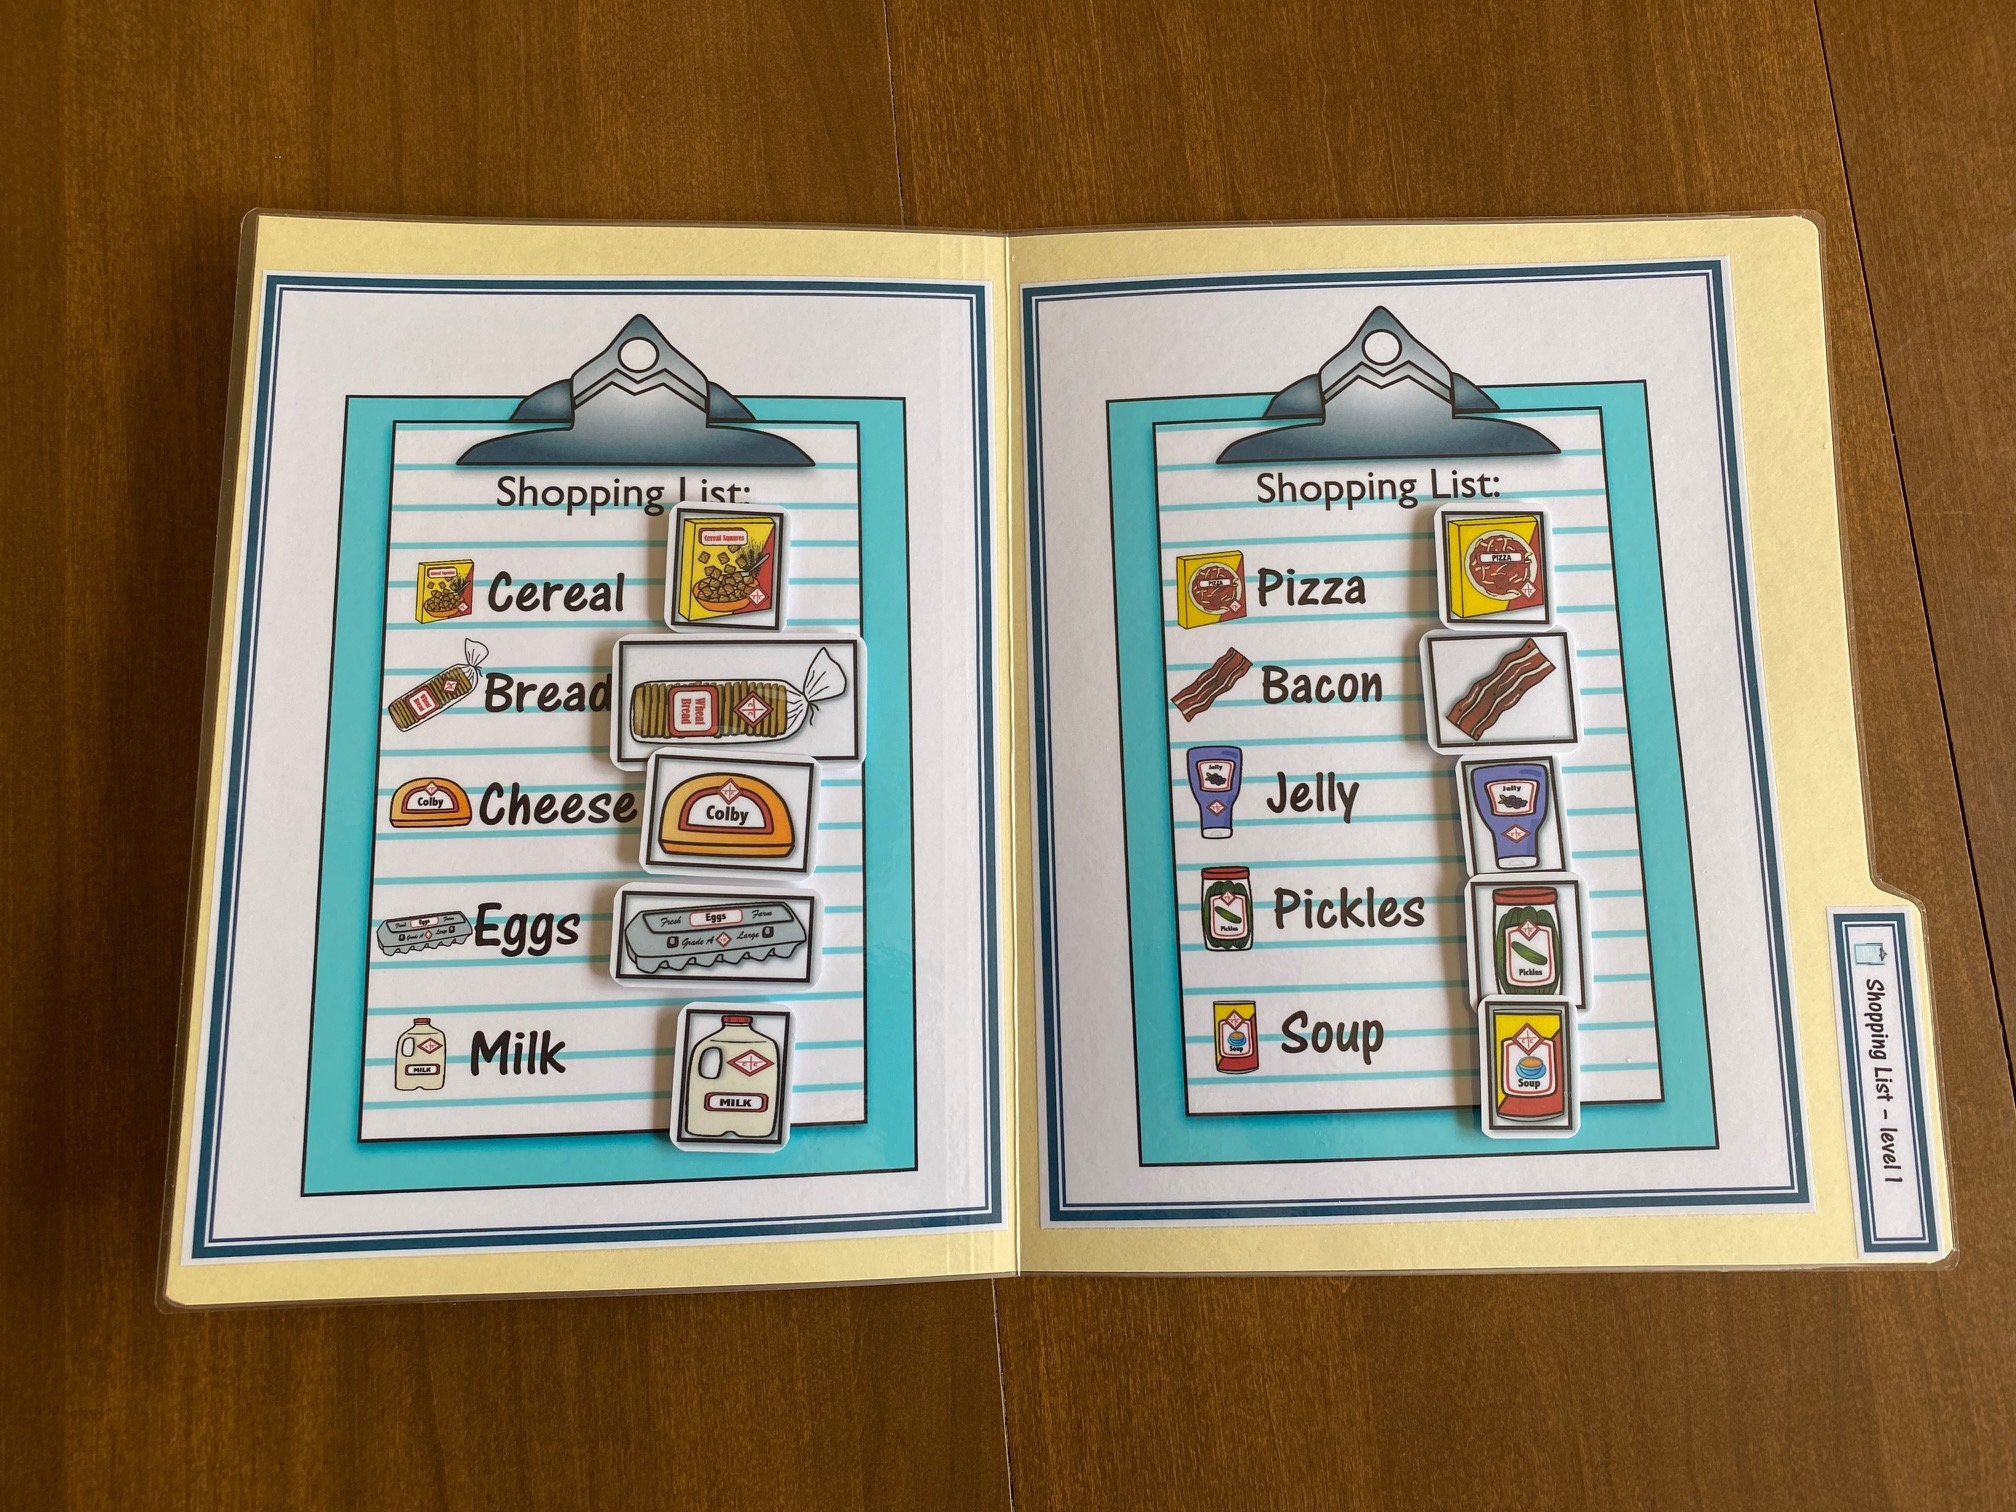 ELA Task Boxes: Set 1 grades 3-5 With Carrying Case 